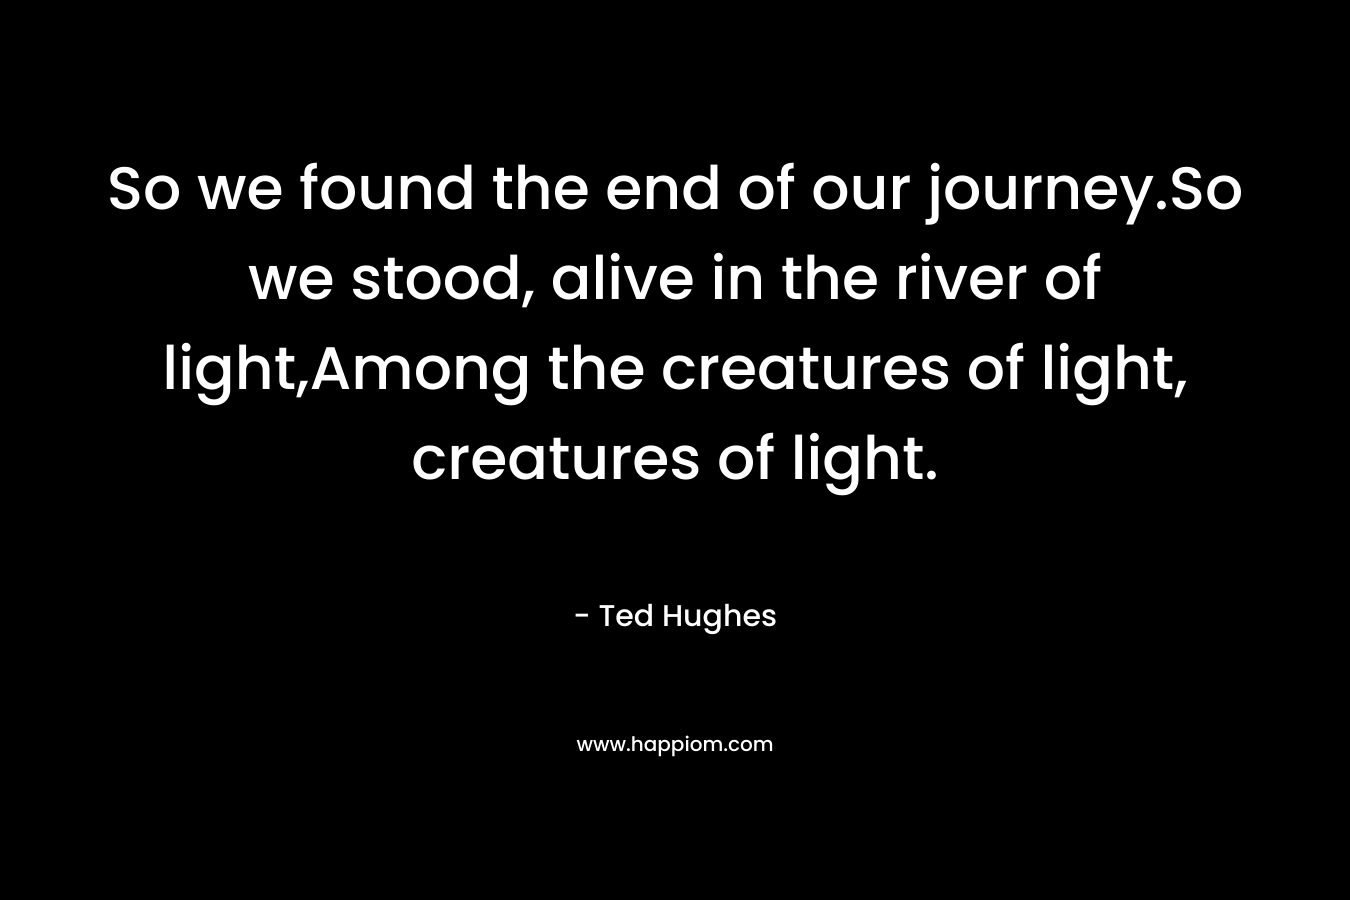 So we found the end of our journey.So we stood, alive in the river of light,Among the creatures of light, creatures of light.